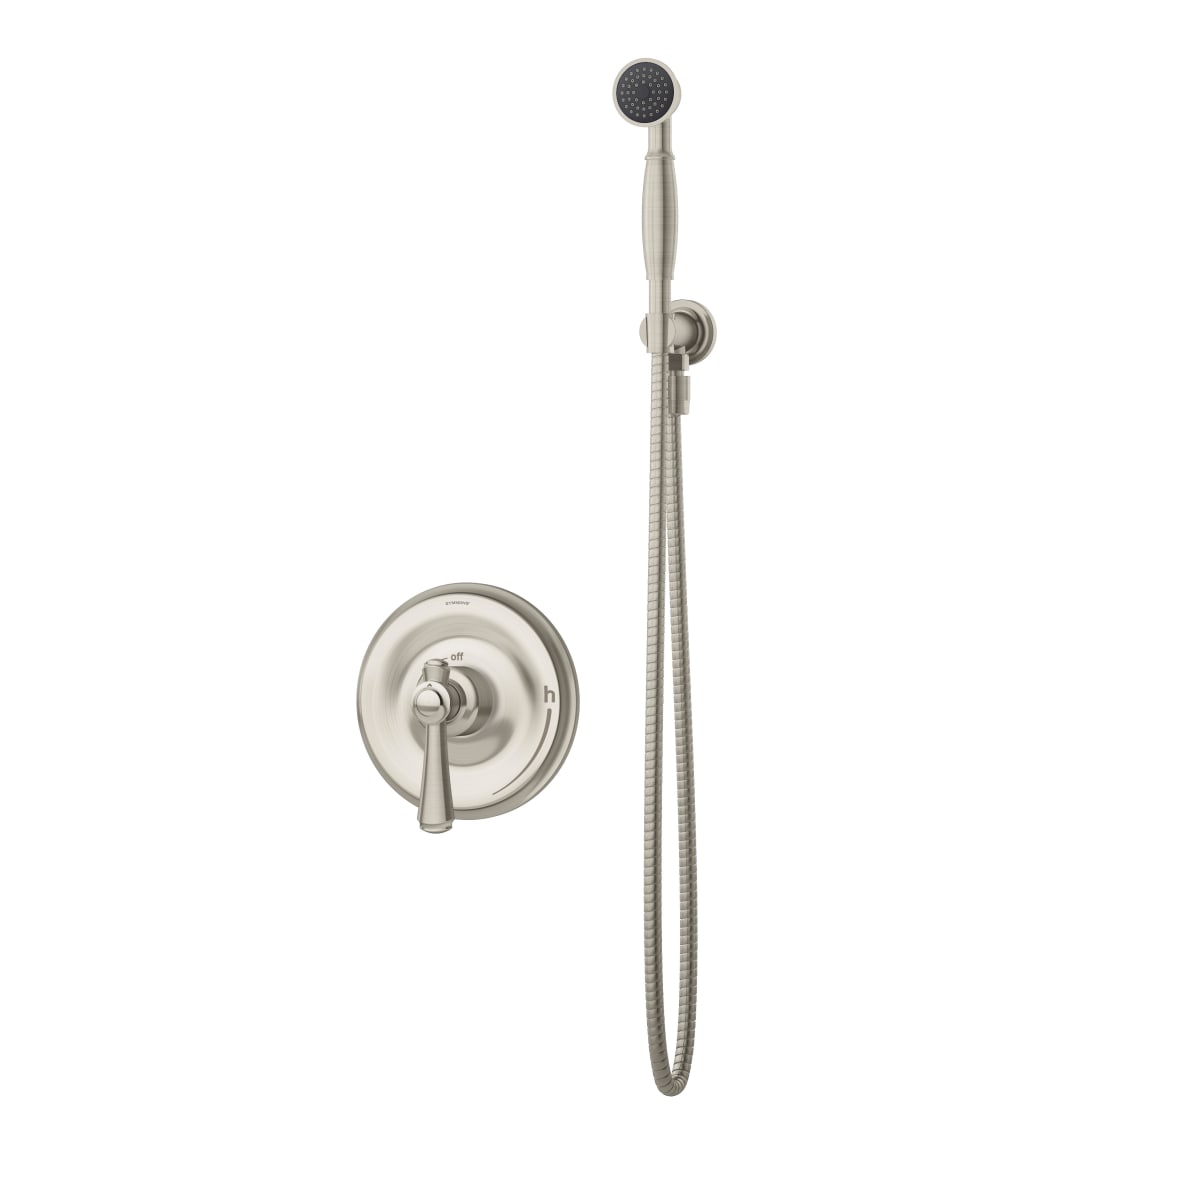 , Valve Not Included Symmons 5403-STN-2.0-TRM Degas Single Handle Handshower Faucet Trim in Satin Nickel 